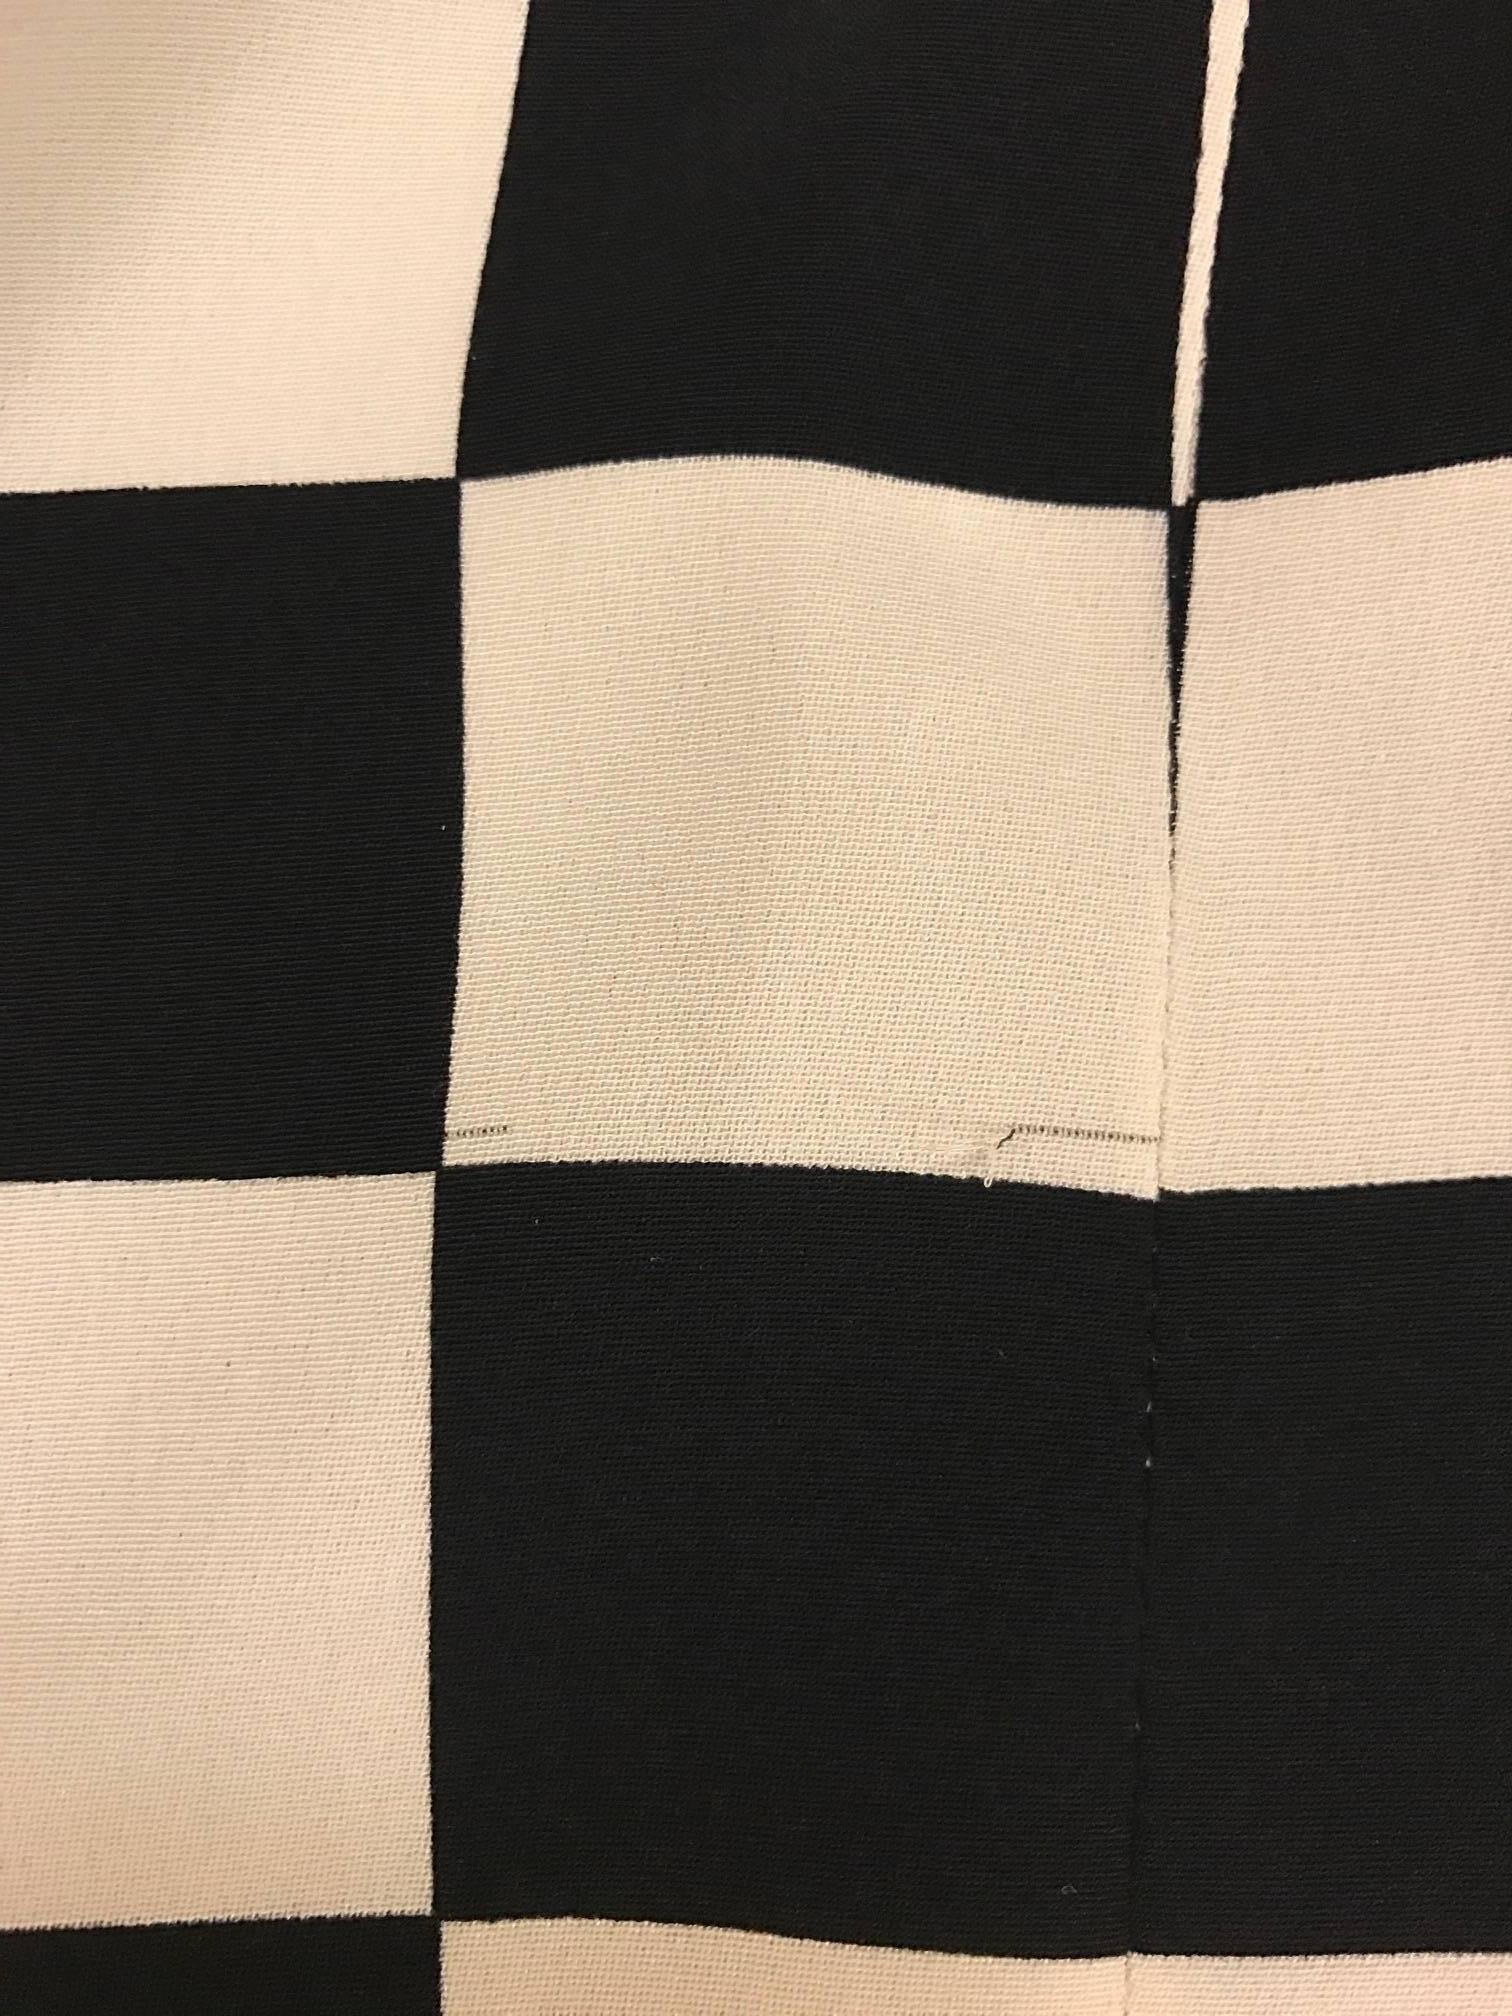 Gianni Versace Couture 1990s Black and White Check Silk Pencil Skirt  3